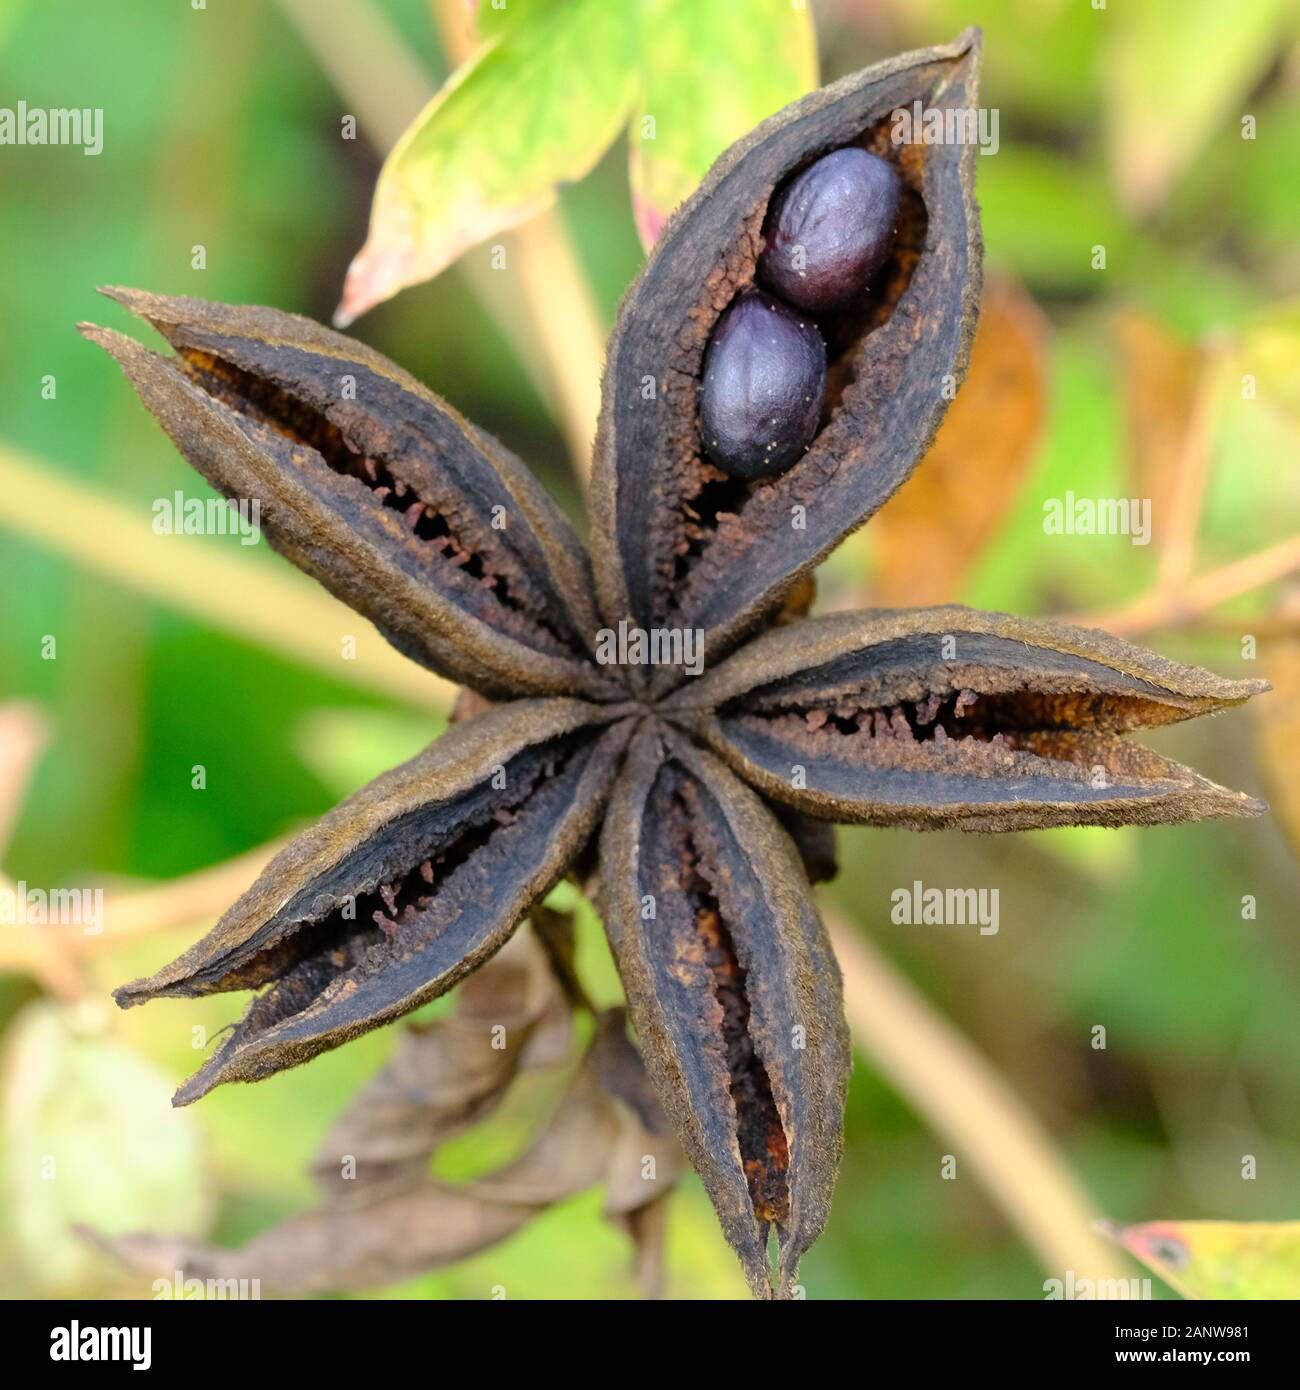 Tree Peony, Seed Heads, Paeonia suffruticosa, Seed, Propigating, Horticulture, Horticulture, Brown Seeds, Asiatic, Japanese, Country Garden, Cheshire. Stock Photo